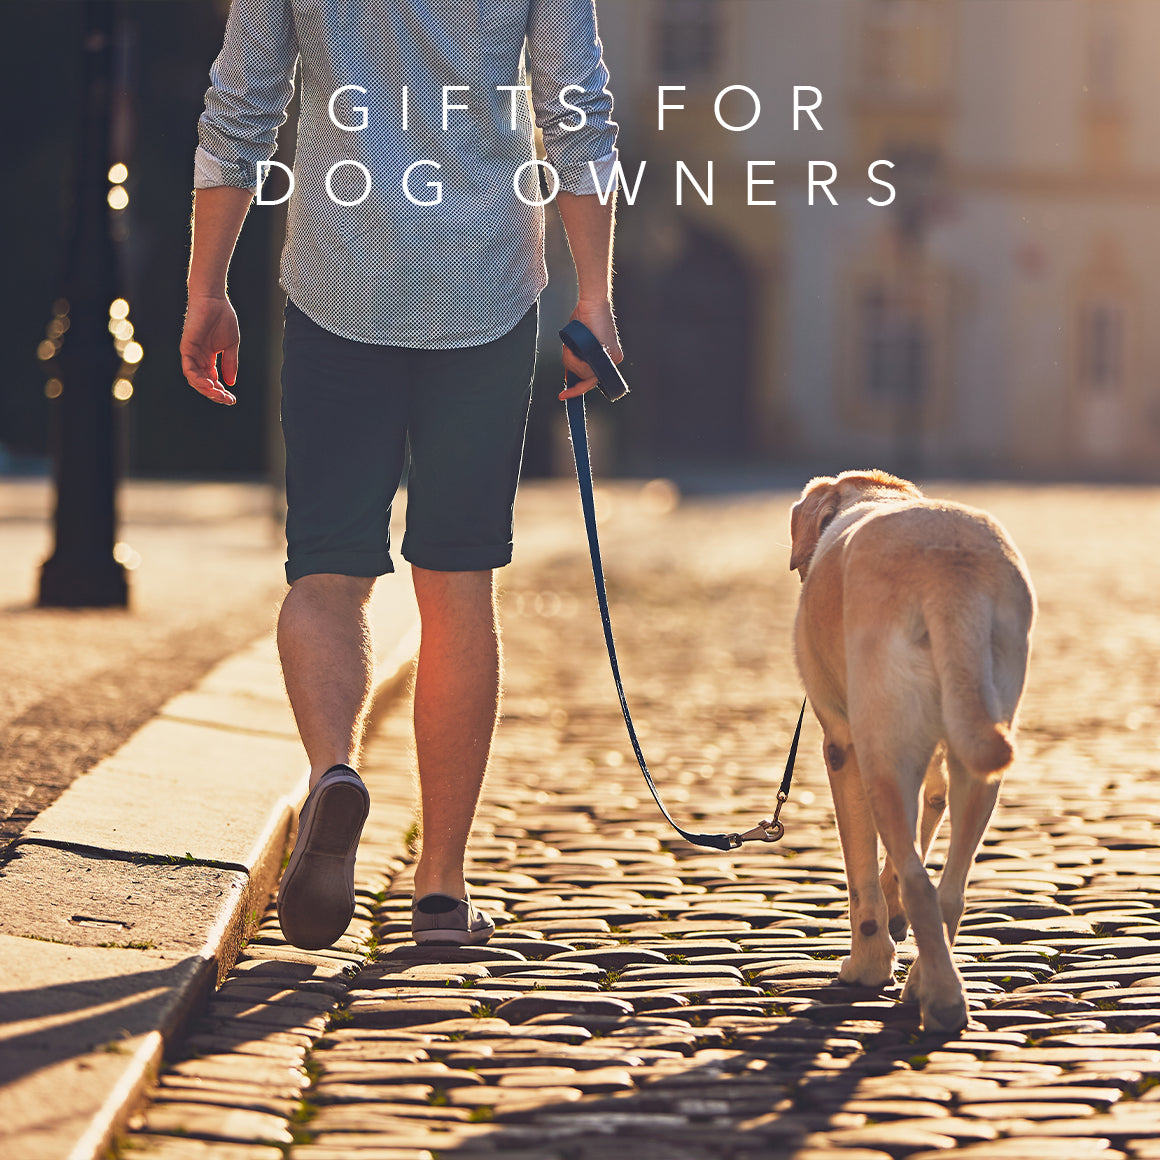 3 Great Gifts For Dog Owners